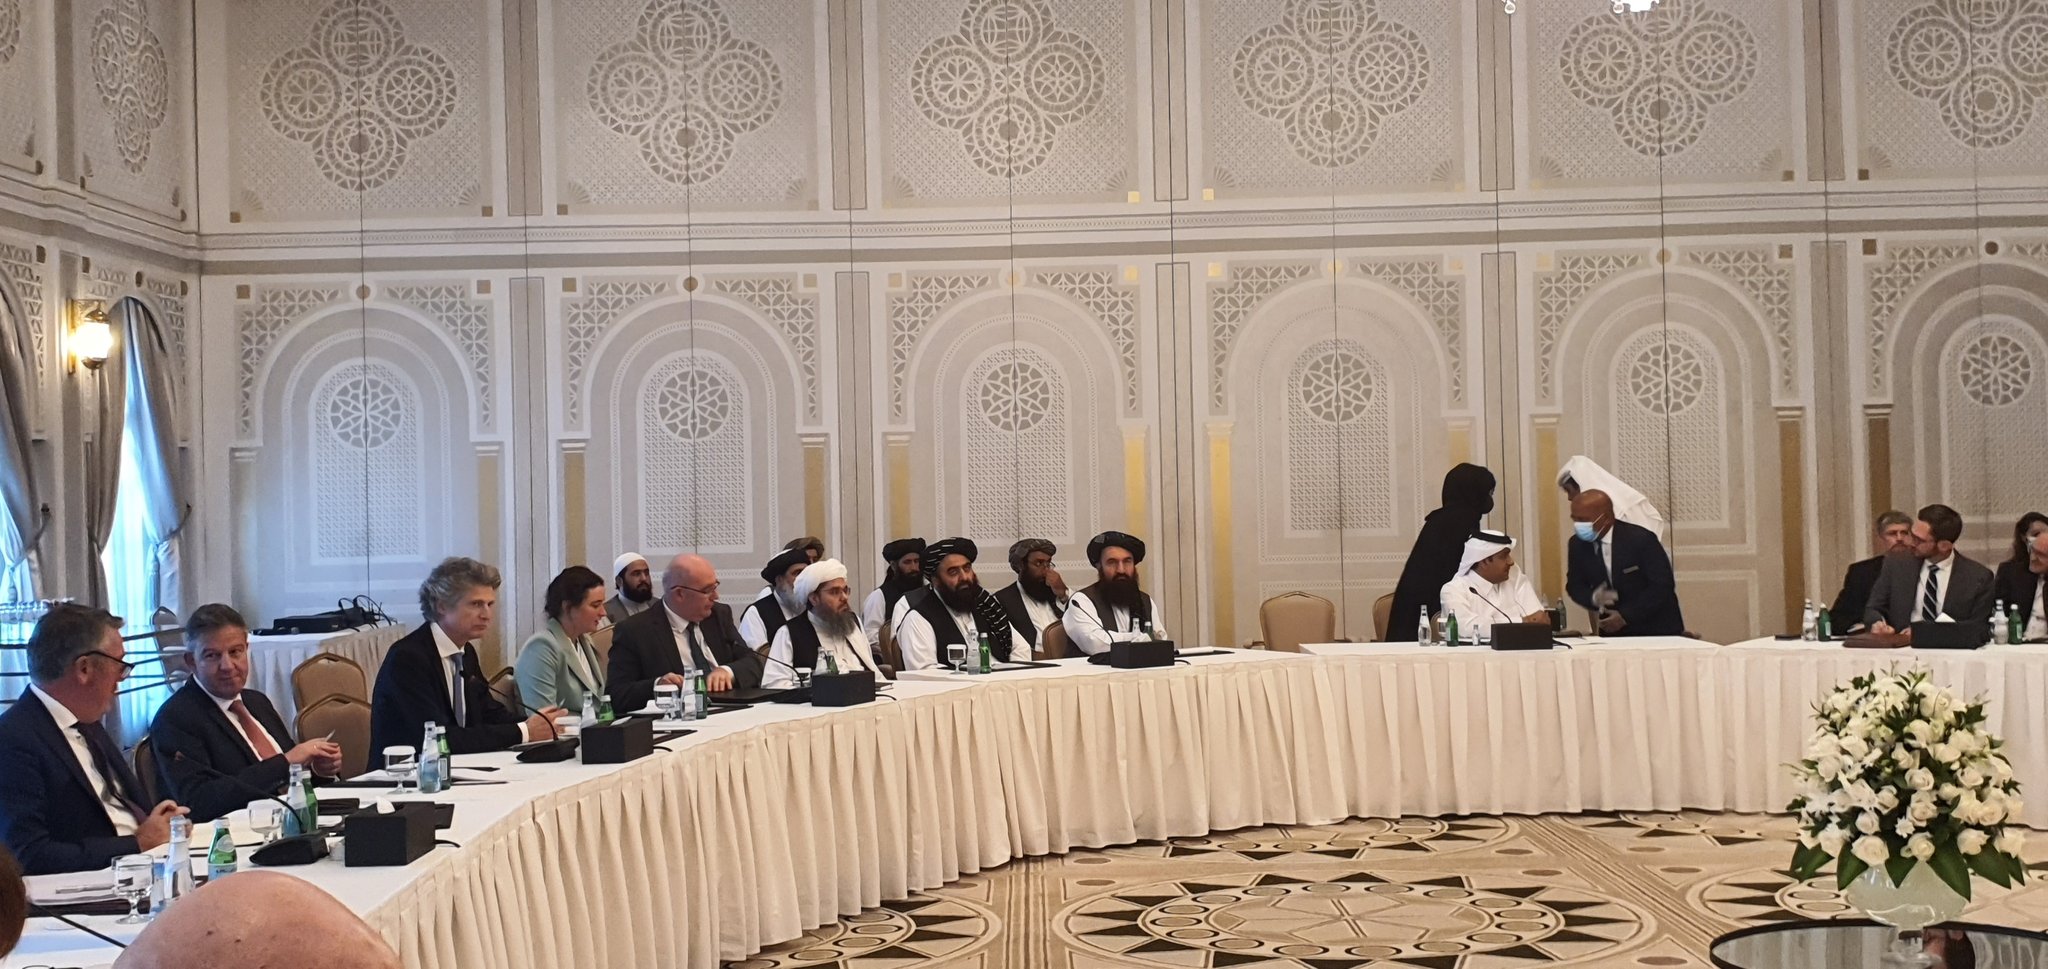 Taliban urge world to remove sanctions, formally recognize IEA government